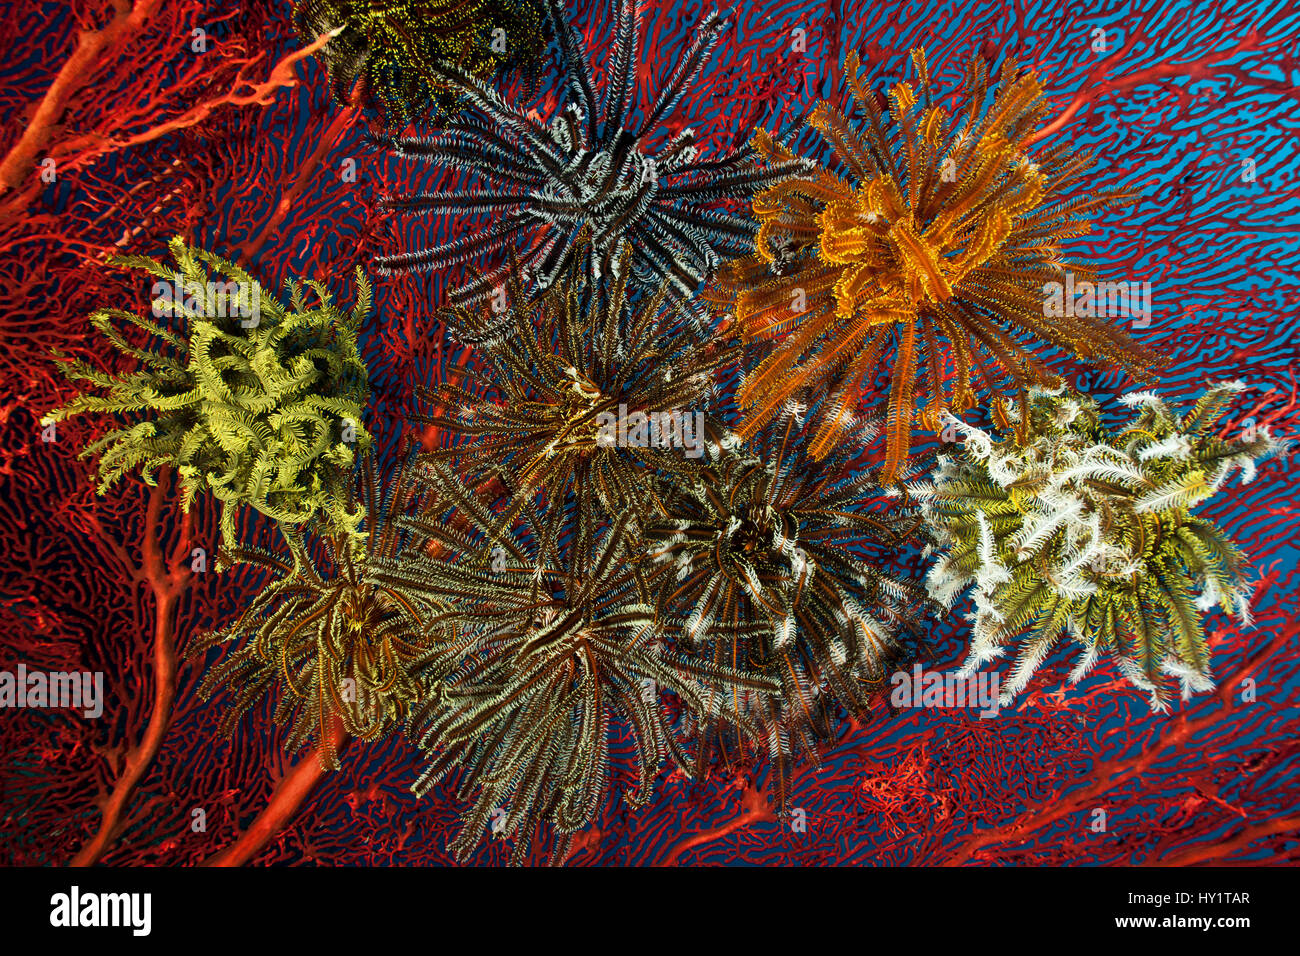 Gorgonian fan coral with Featherstars / crinoids attached, West New Britain, Papua New Guinea. Stock Photo